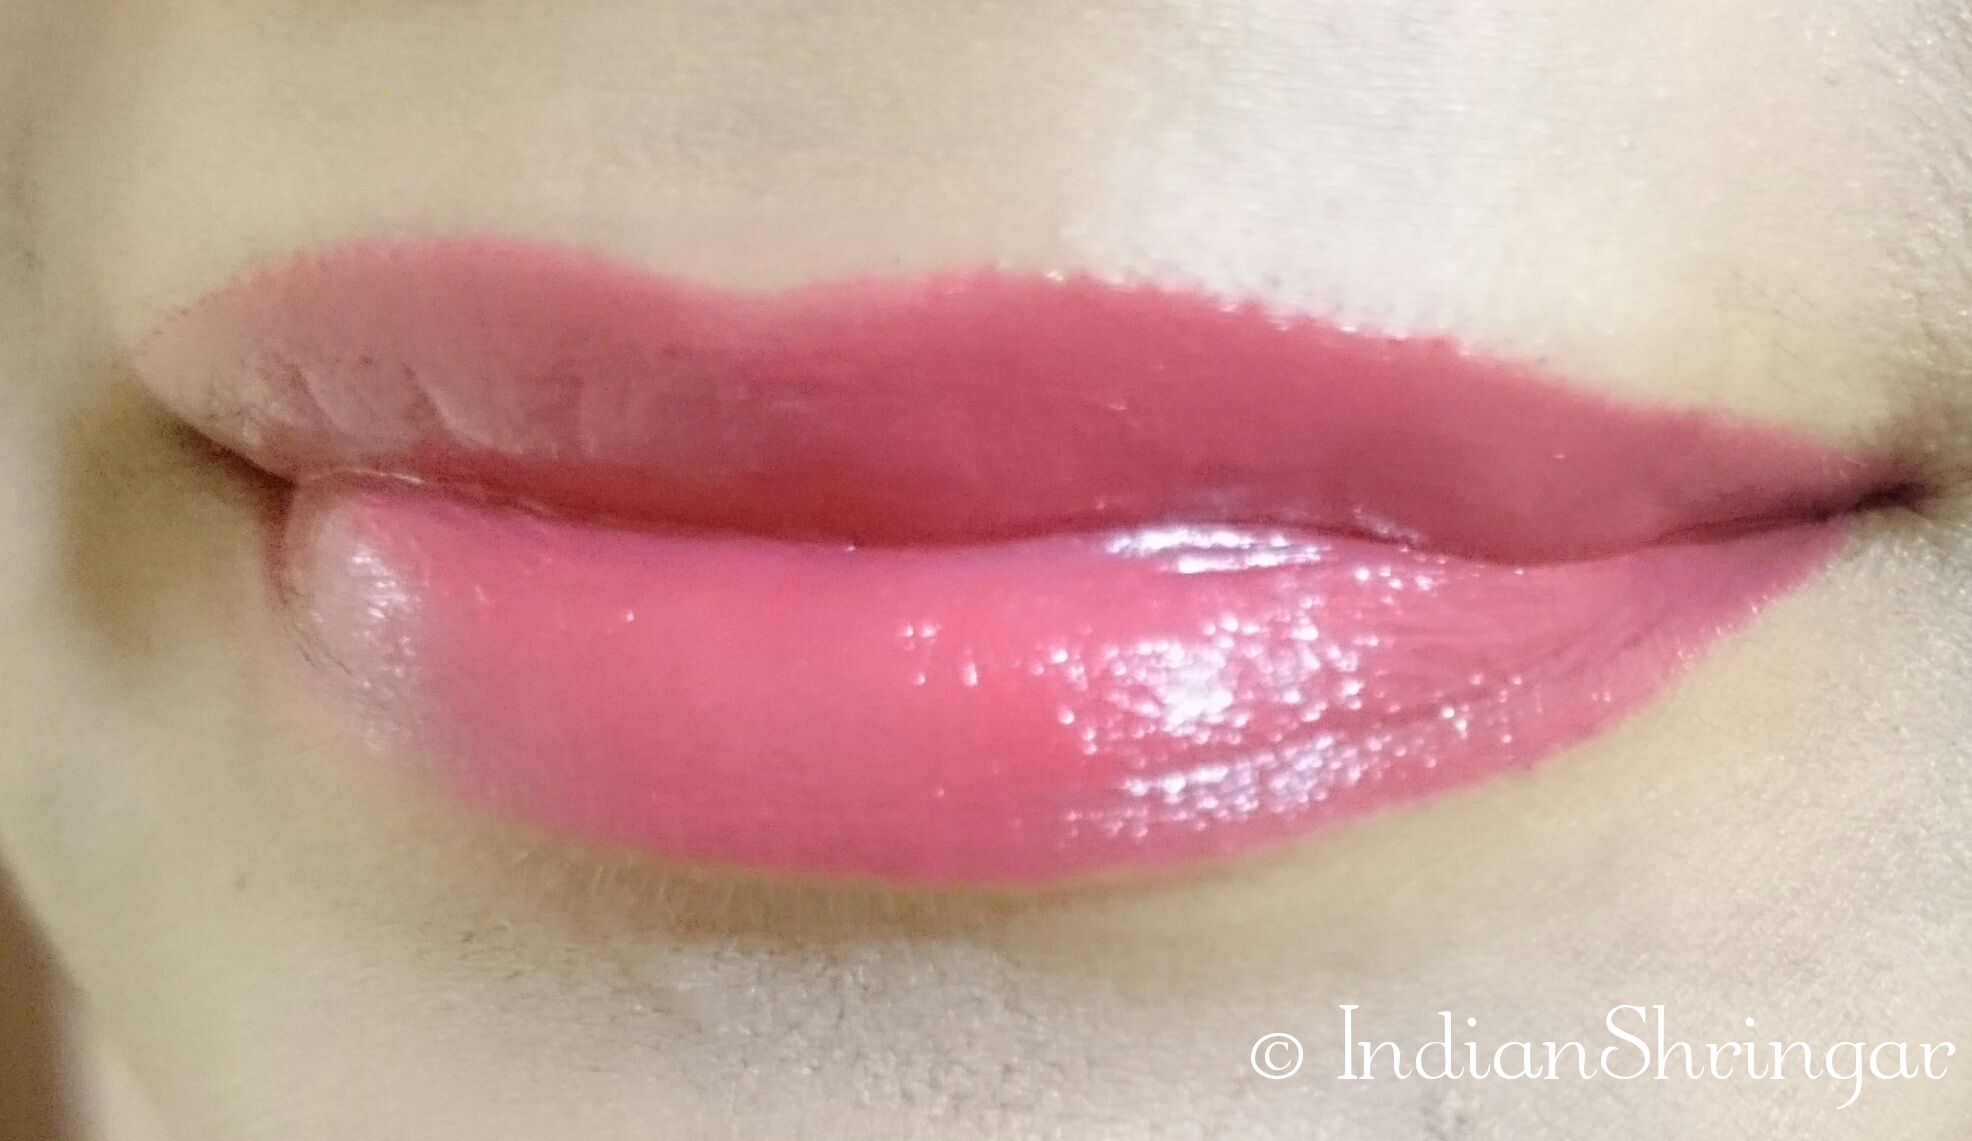 Maybelline Color Show lipsticks in Orange Icon, Fuschia Flare, Cherry Crush and Red Rush - review and swatches